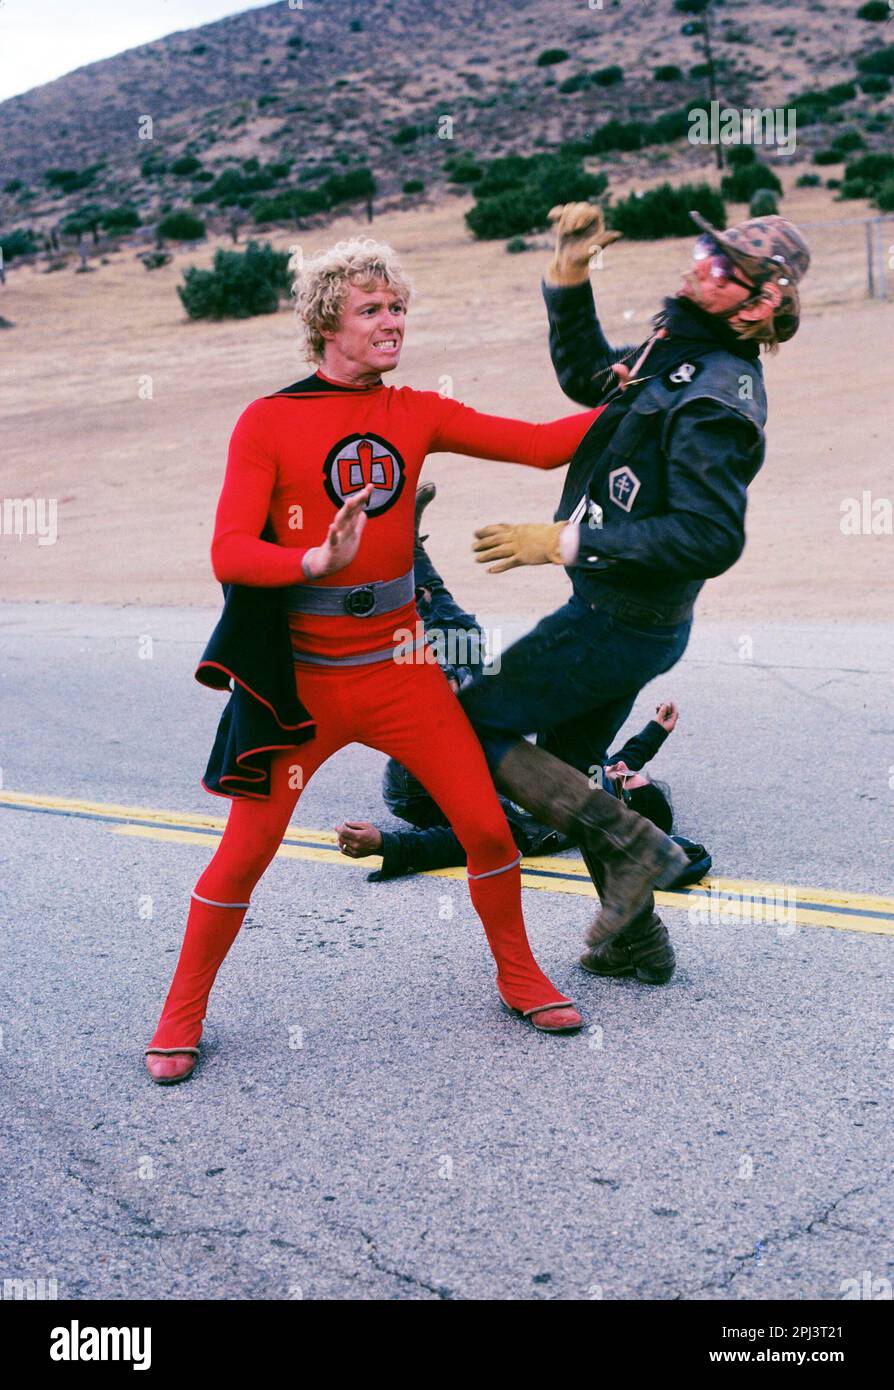 WILLIAM KATT in THE GREATEST AMERICAN HERO (1981), directed by ARNOLD LAVEN. Credit: Stephen J. Cannell / Album Stock Photo